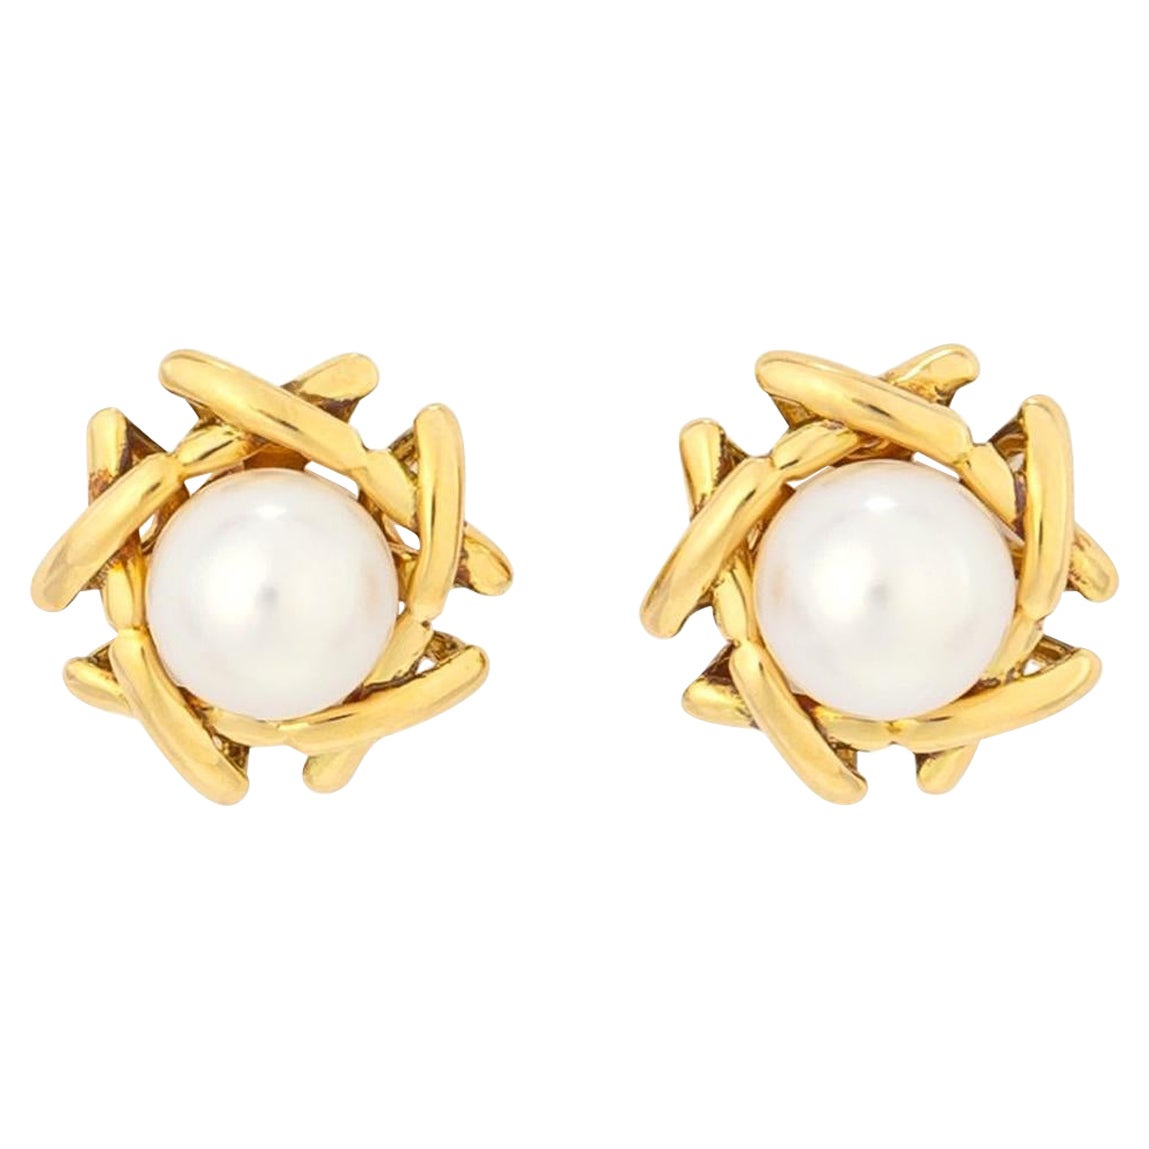 Tiffany & Co. Pearl and Gold Stud Earrings